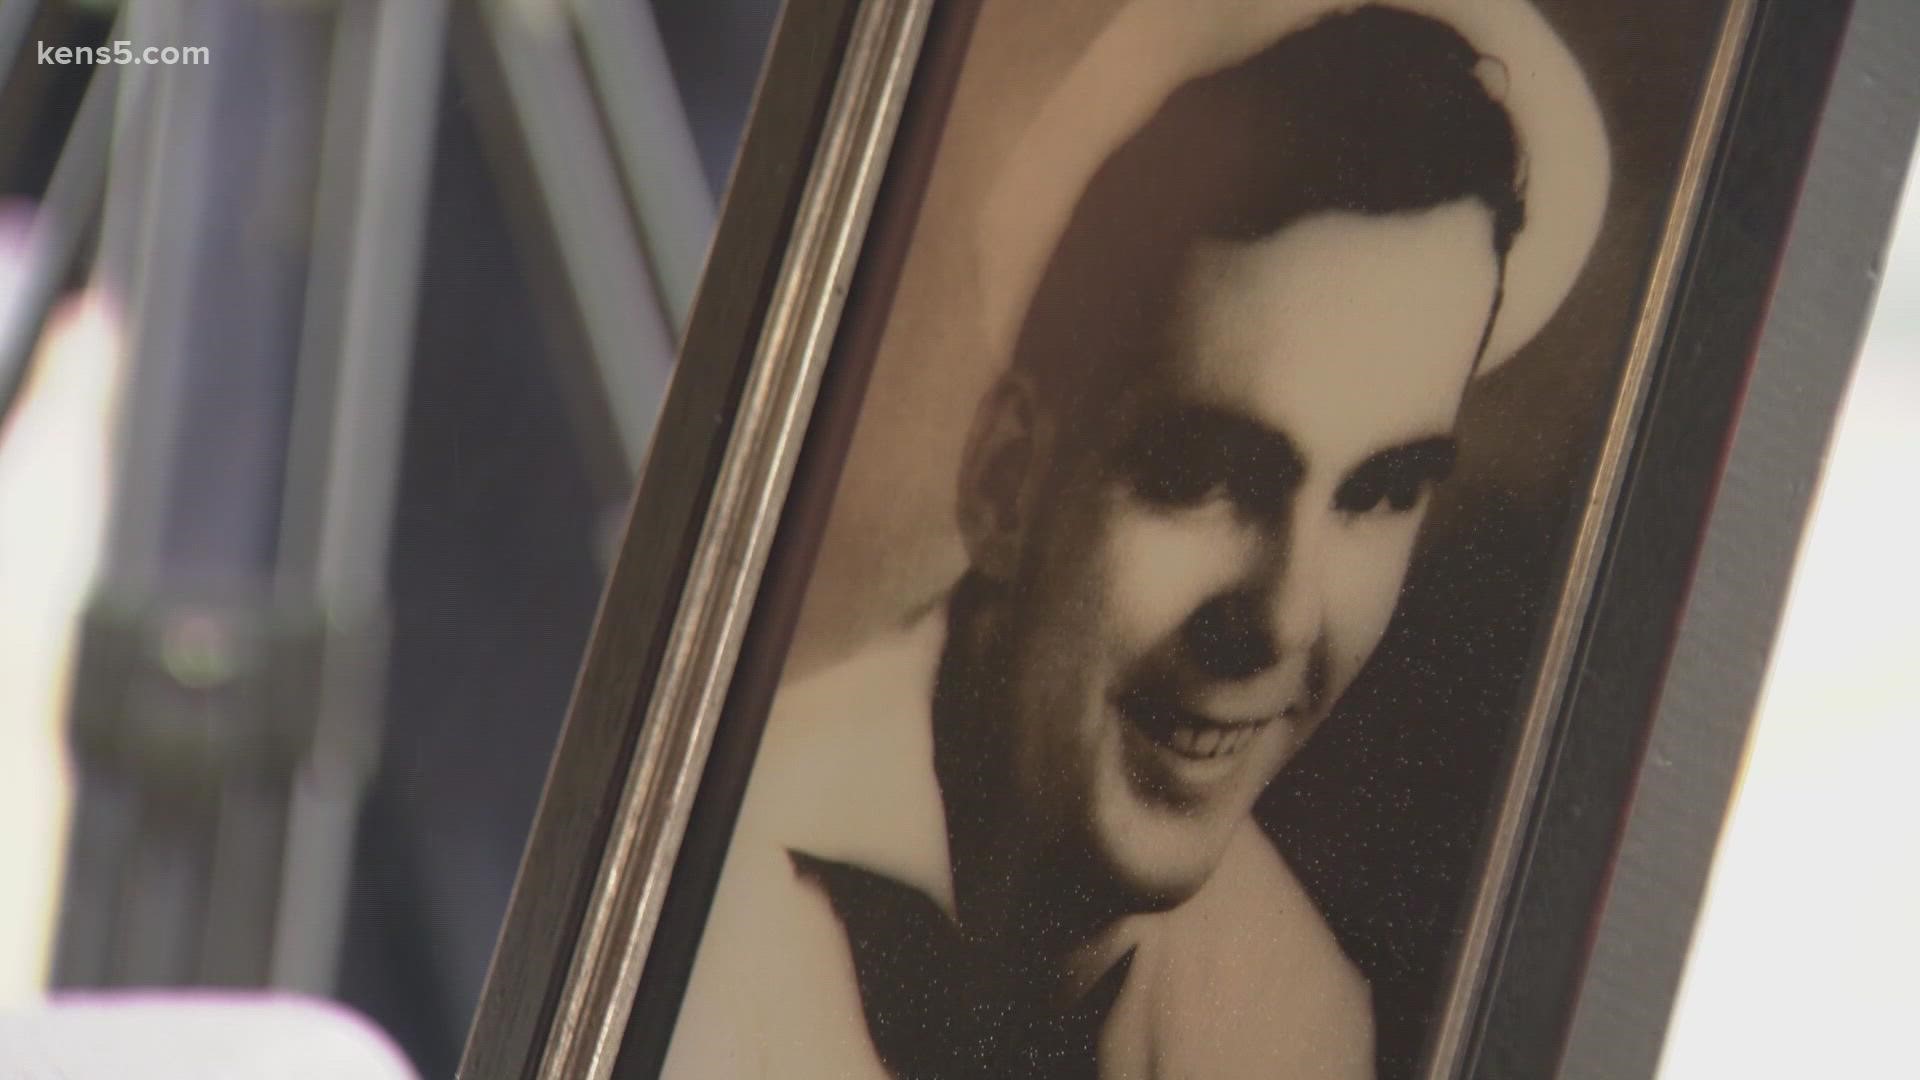 For more than 70 years Frank Nicoles's remains went unidentified. Now his relatives have closure.